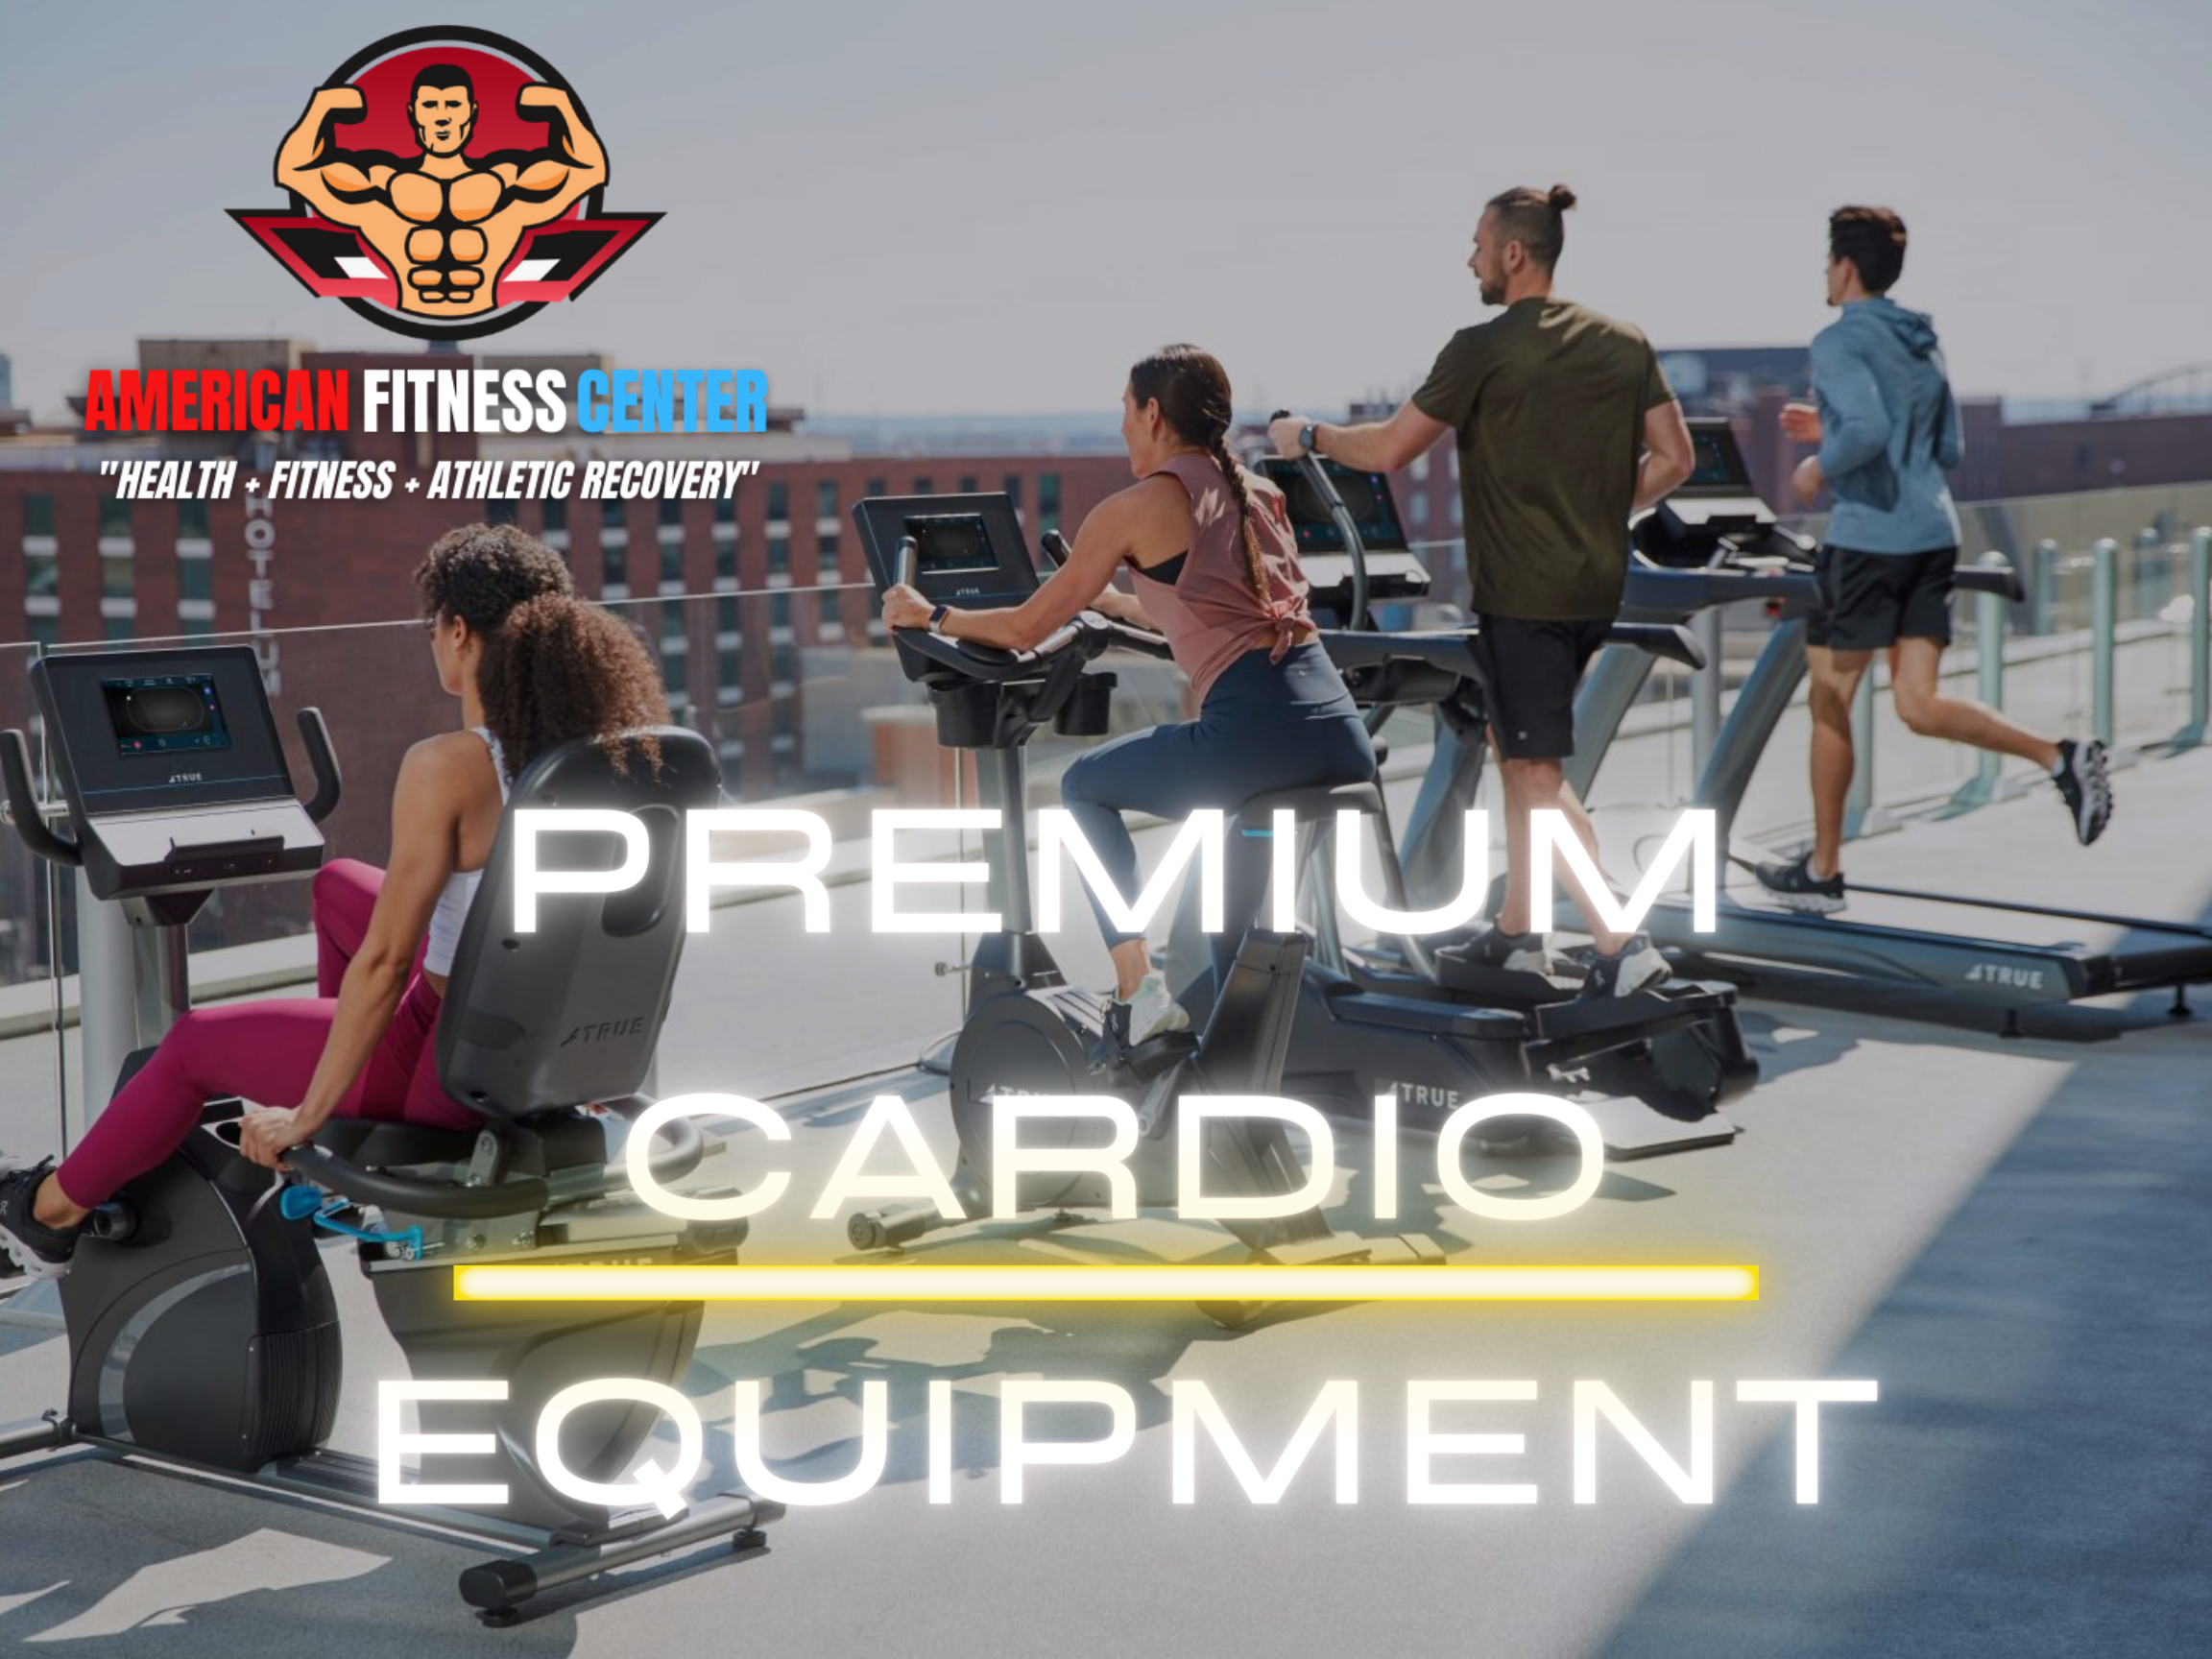 24-Hour-Gym-With-Premium-Cardio-Equipment-In-Snellville-GA-American-Fitness-Center-Snellville